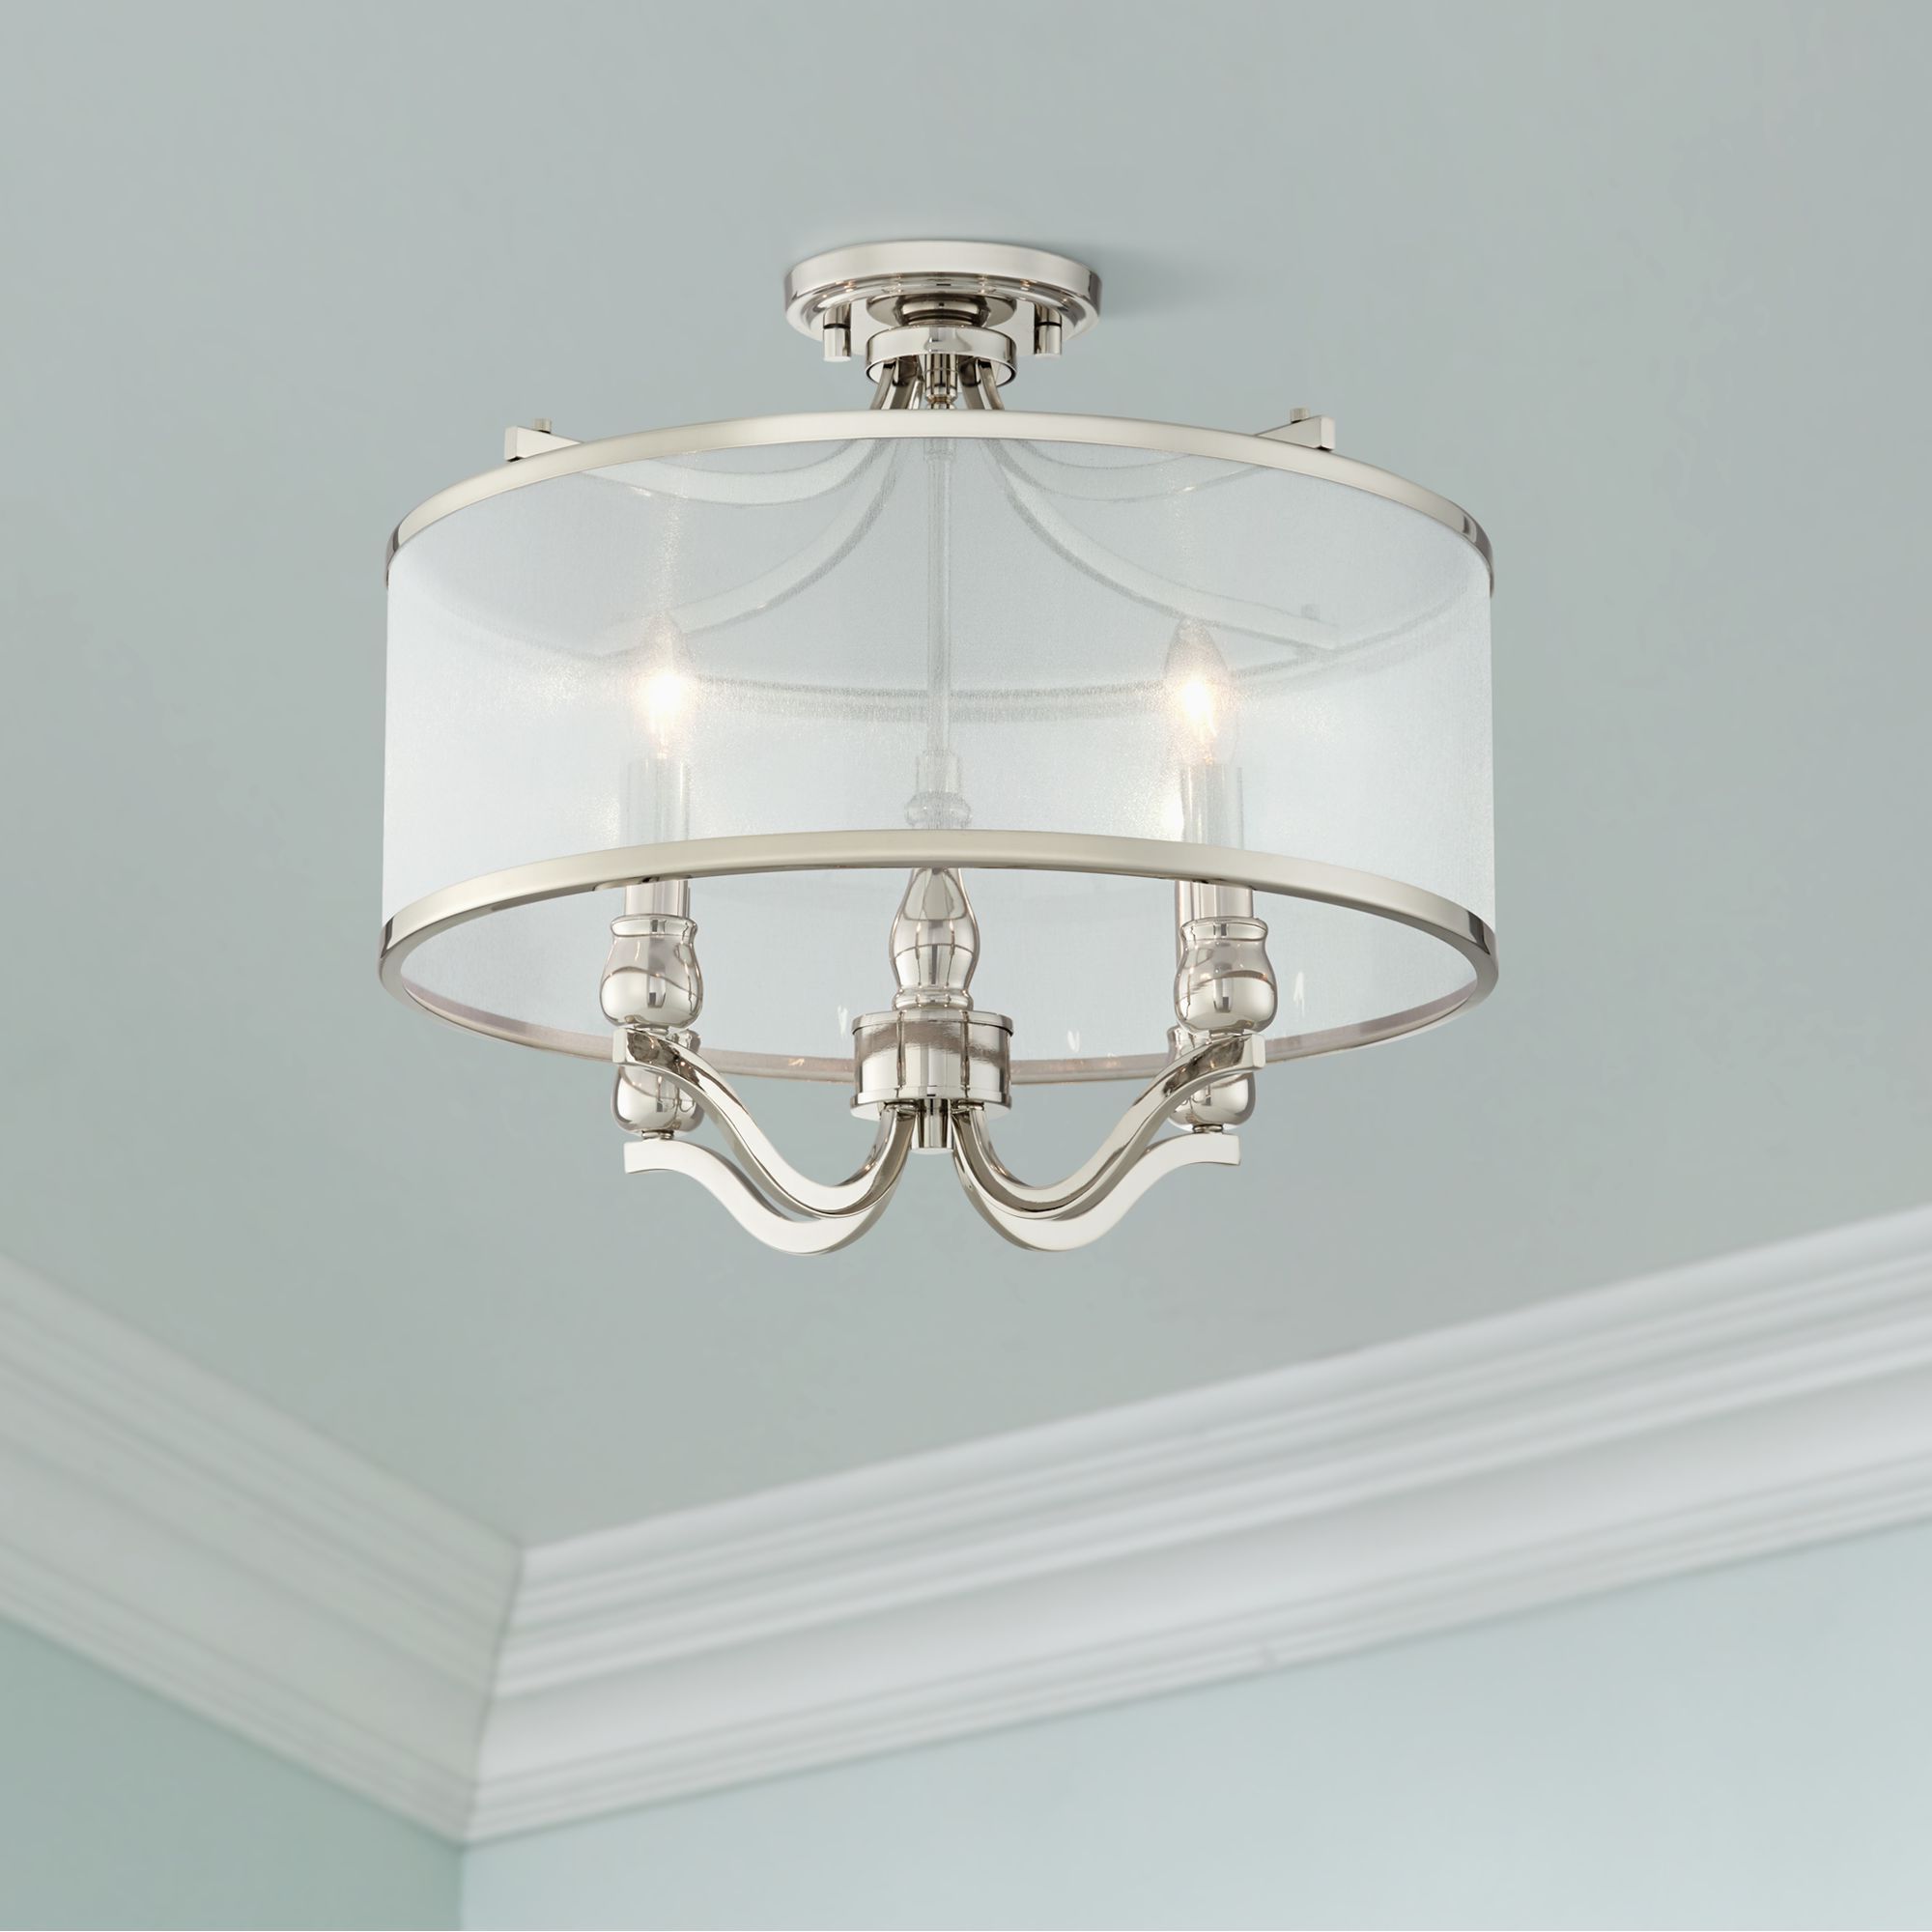 Possini Euro Design Ceiling Light Semi Flush Mount Fixture With Most Recently Released Organza Silver Pendant Lights (View 18 of 20)